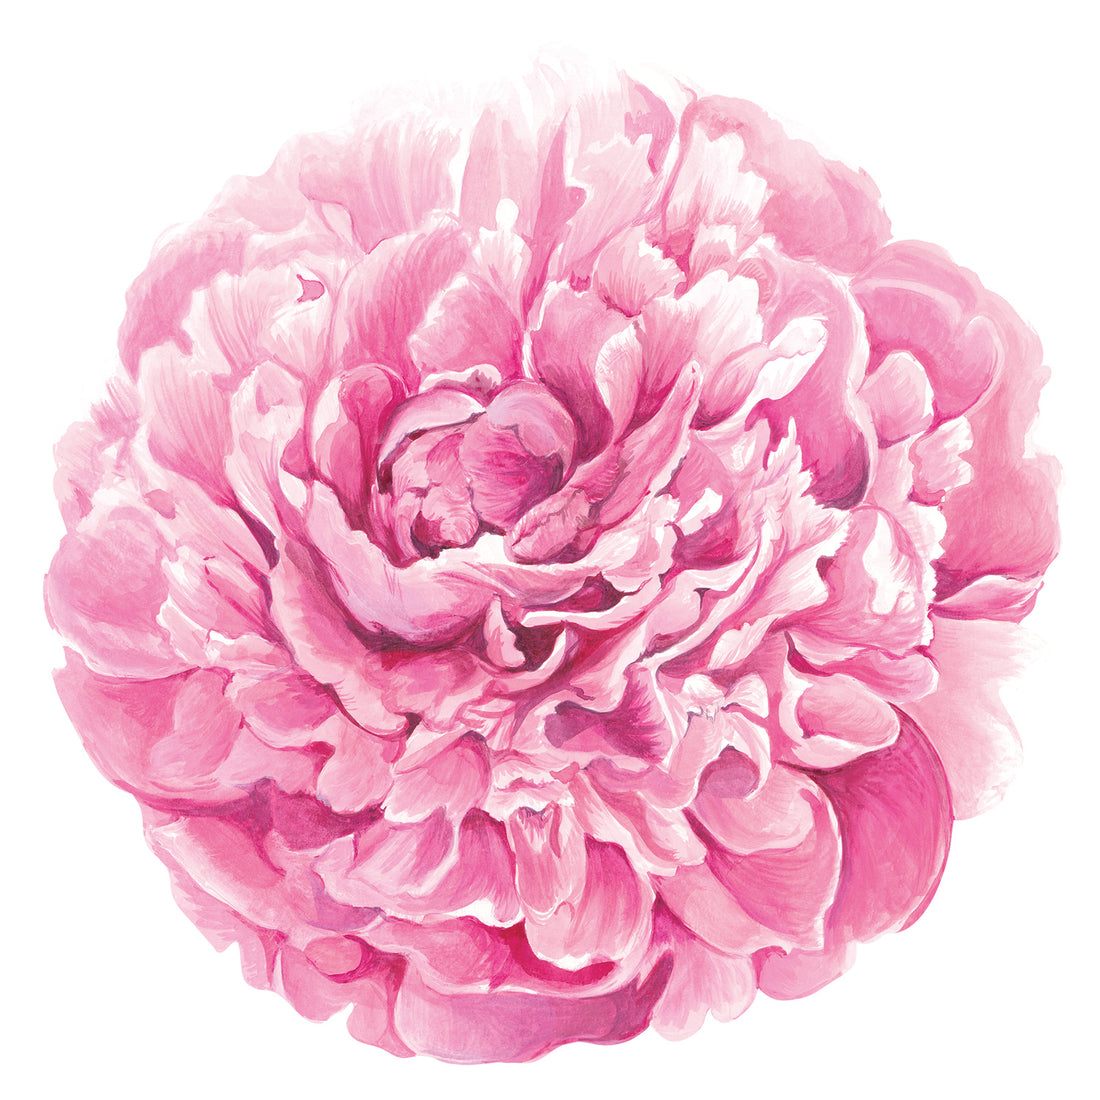 A die-cut illustration of a large, pink peony bloom backed with petals.